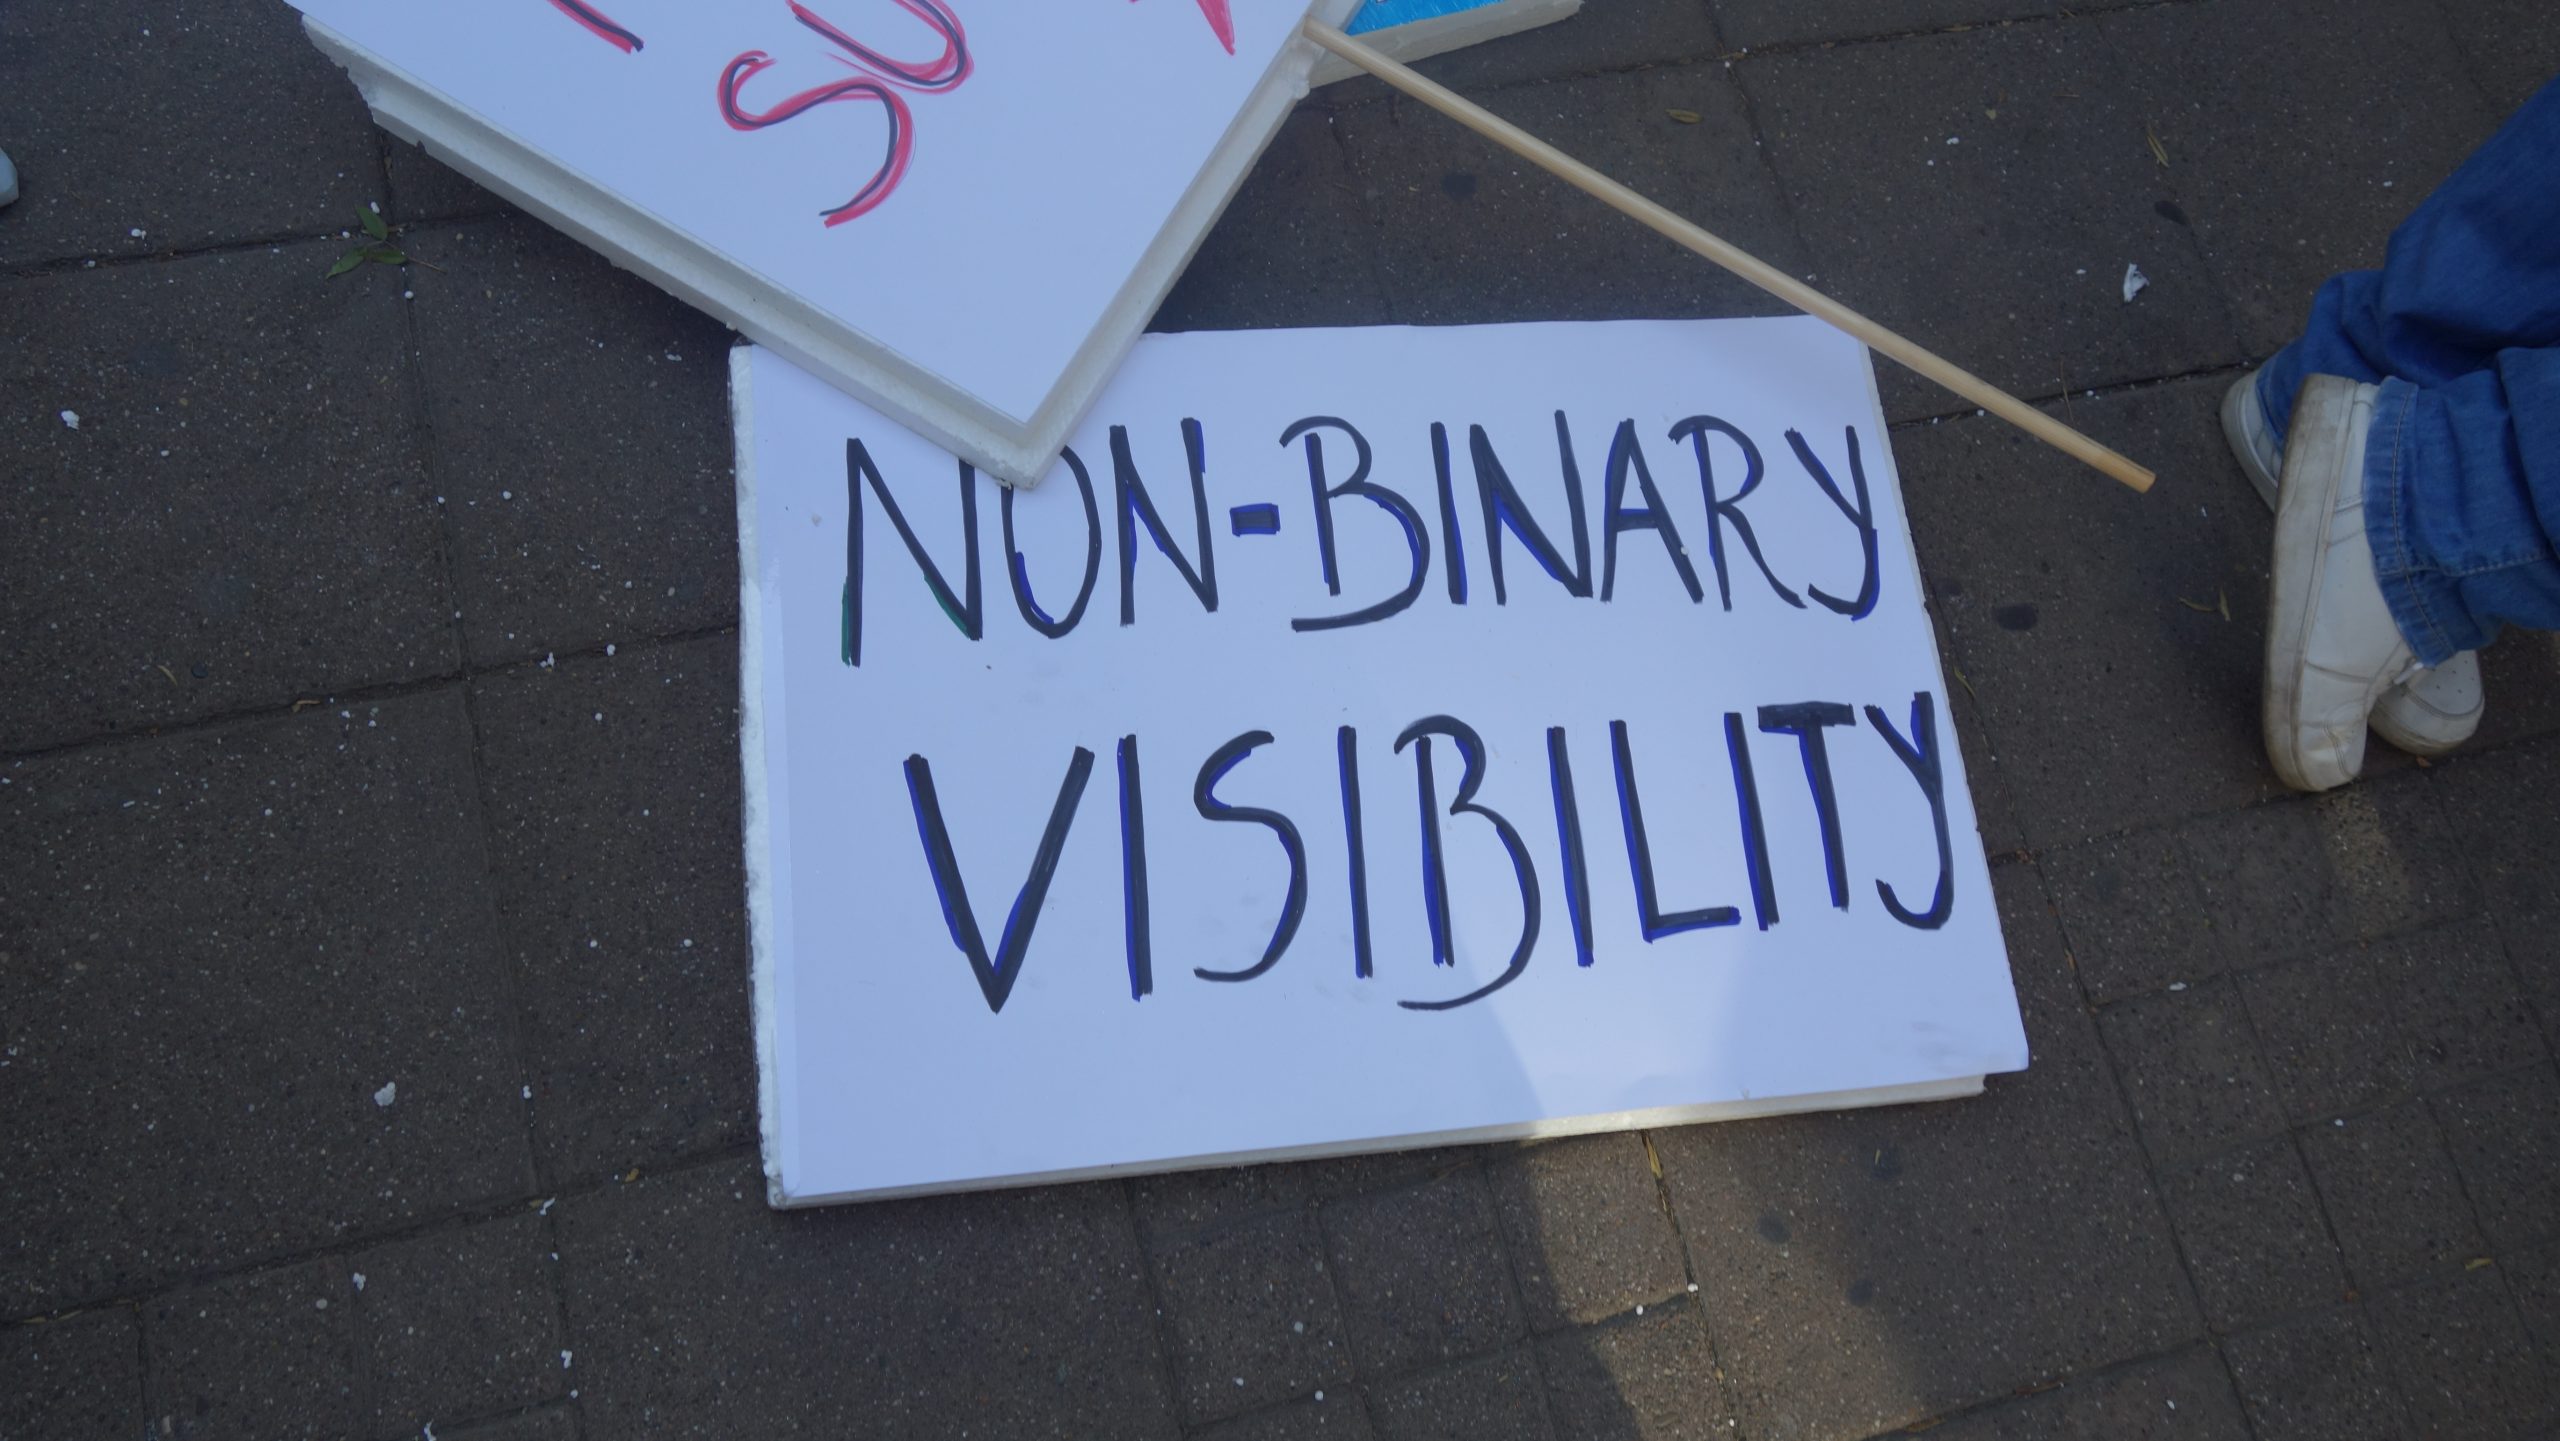 A sign that says "NON-BINARY VISIBILITY."